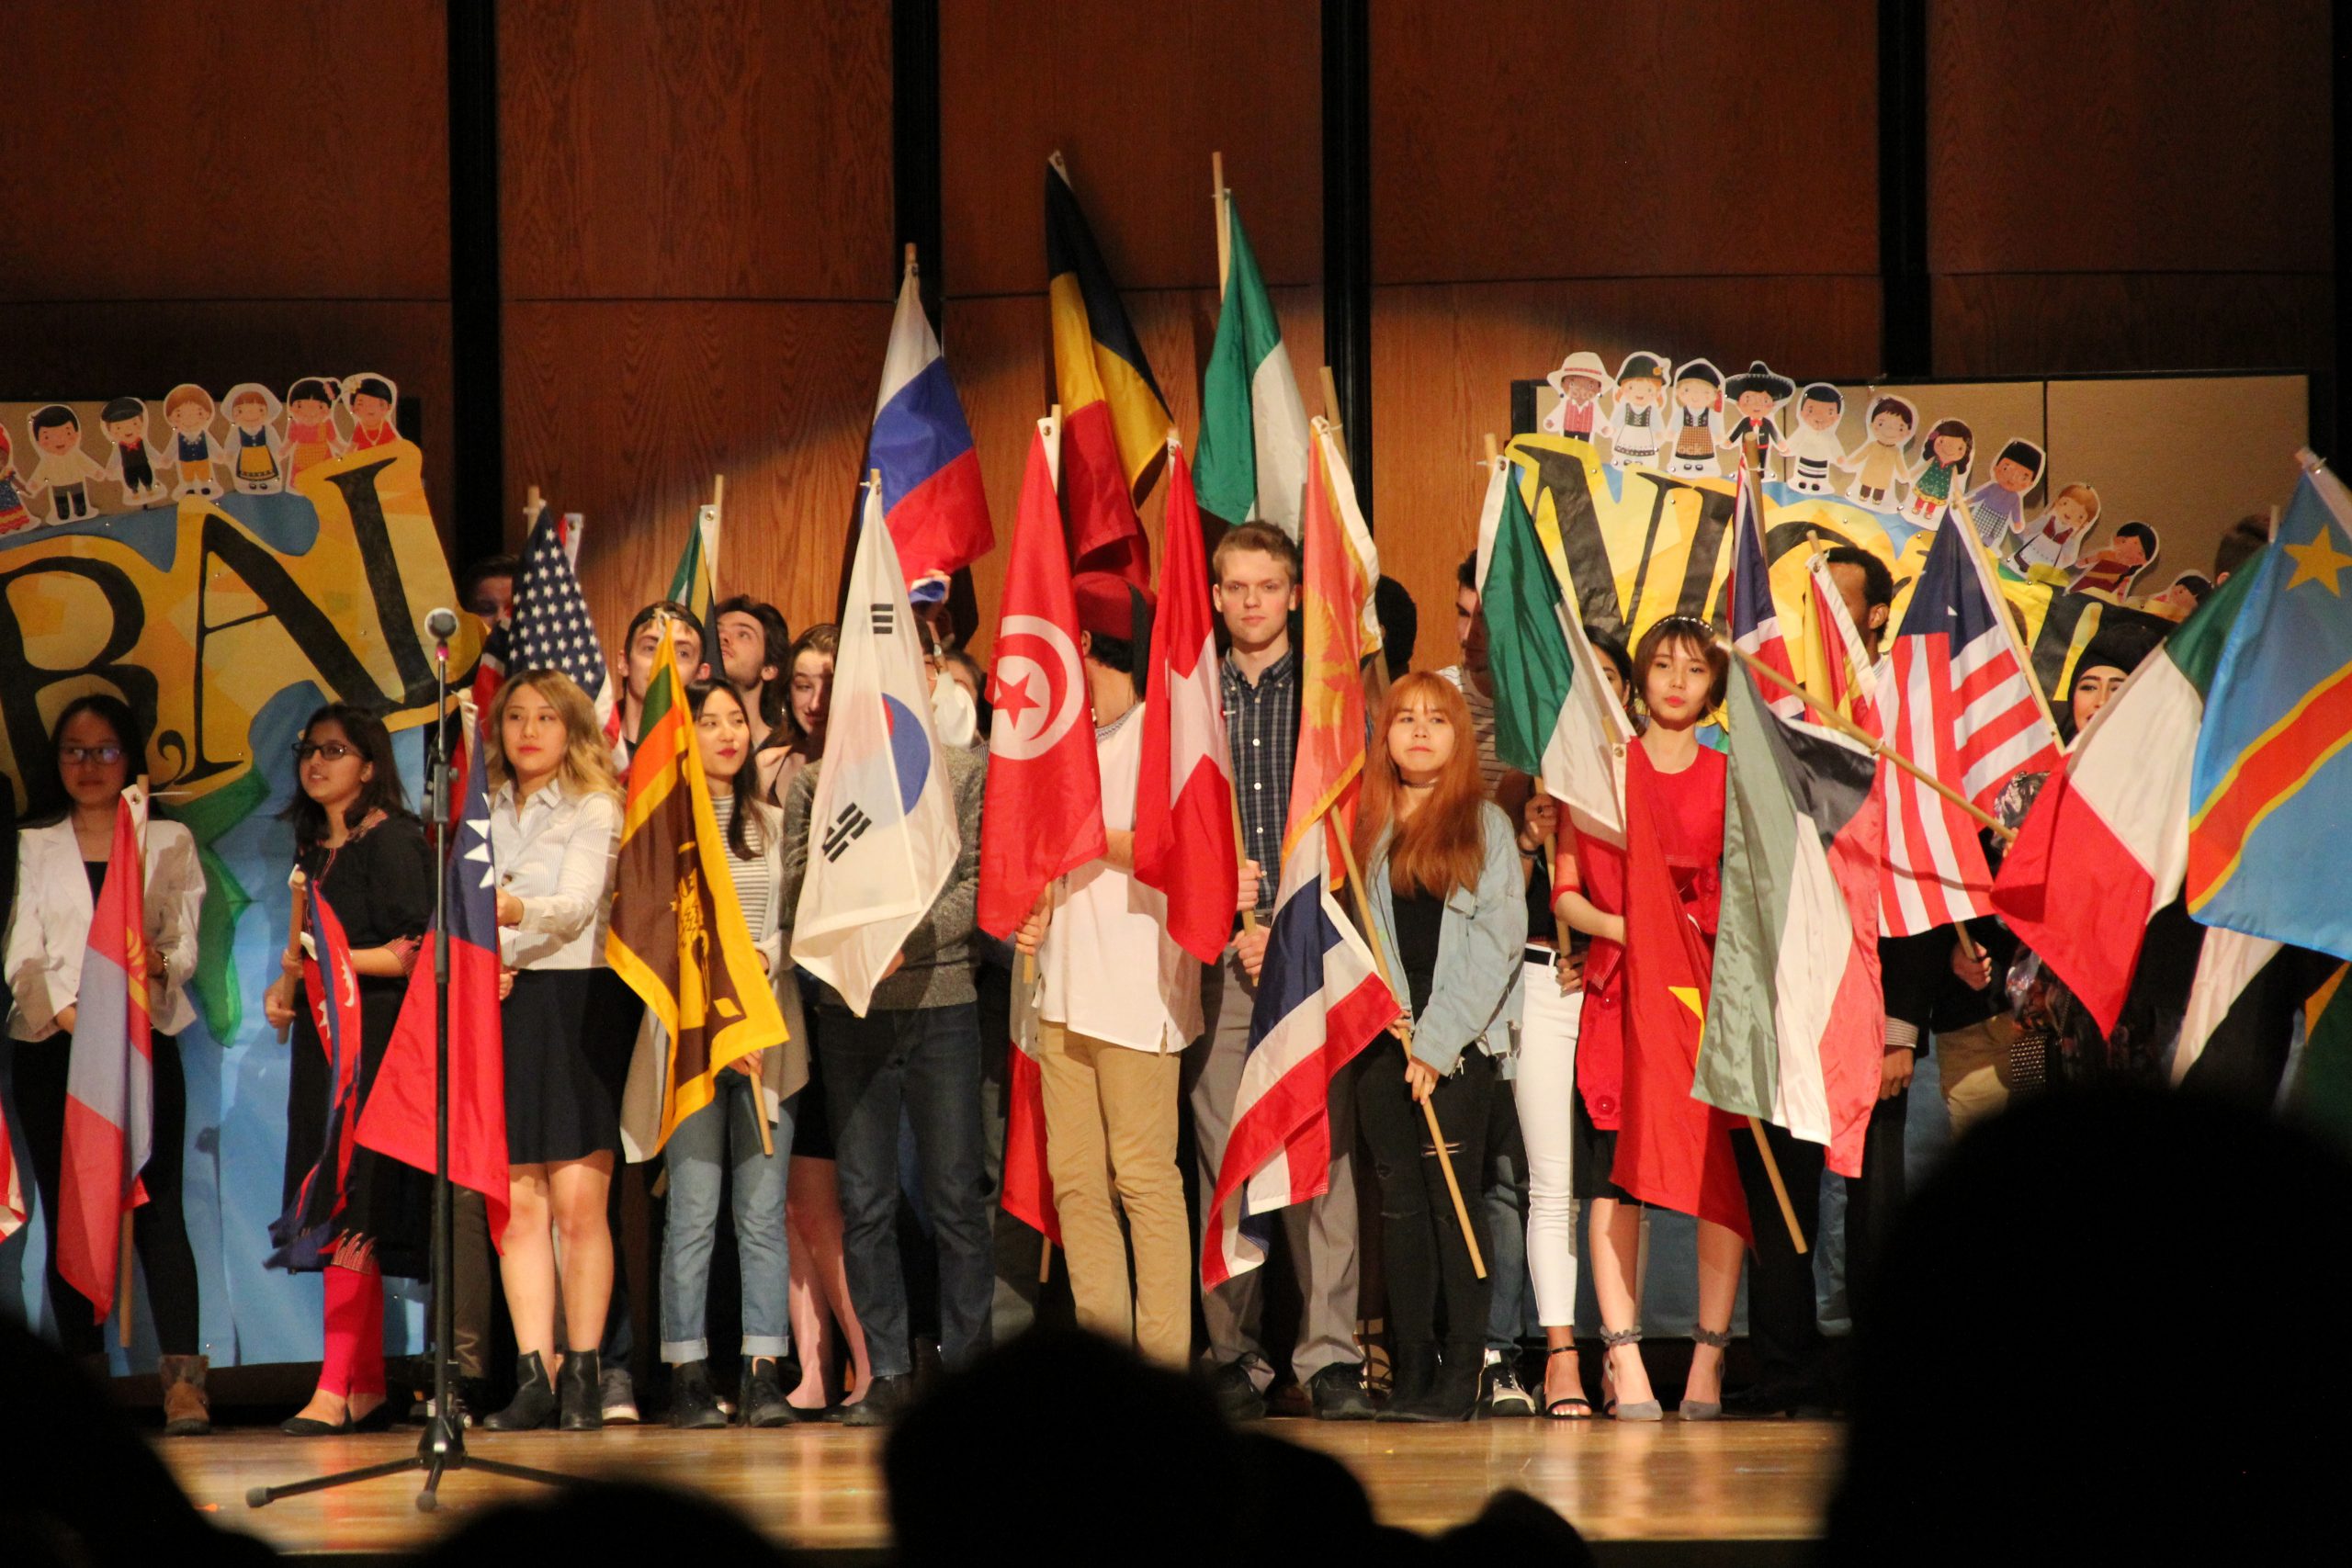 UWS students holding their country's flags in Cultural night.